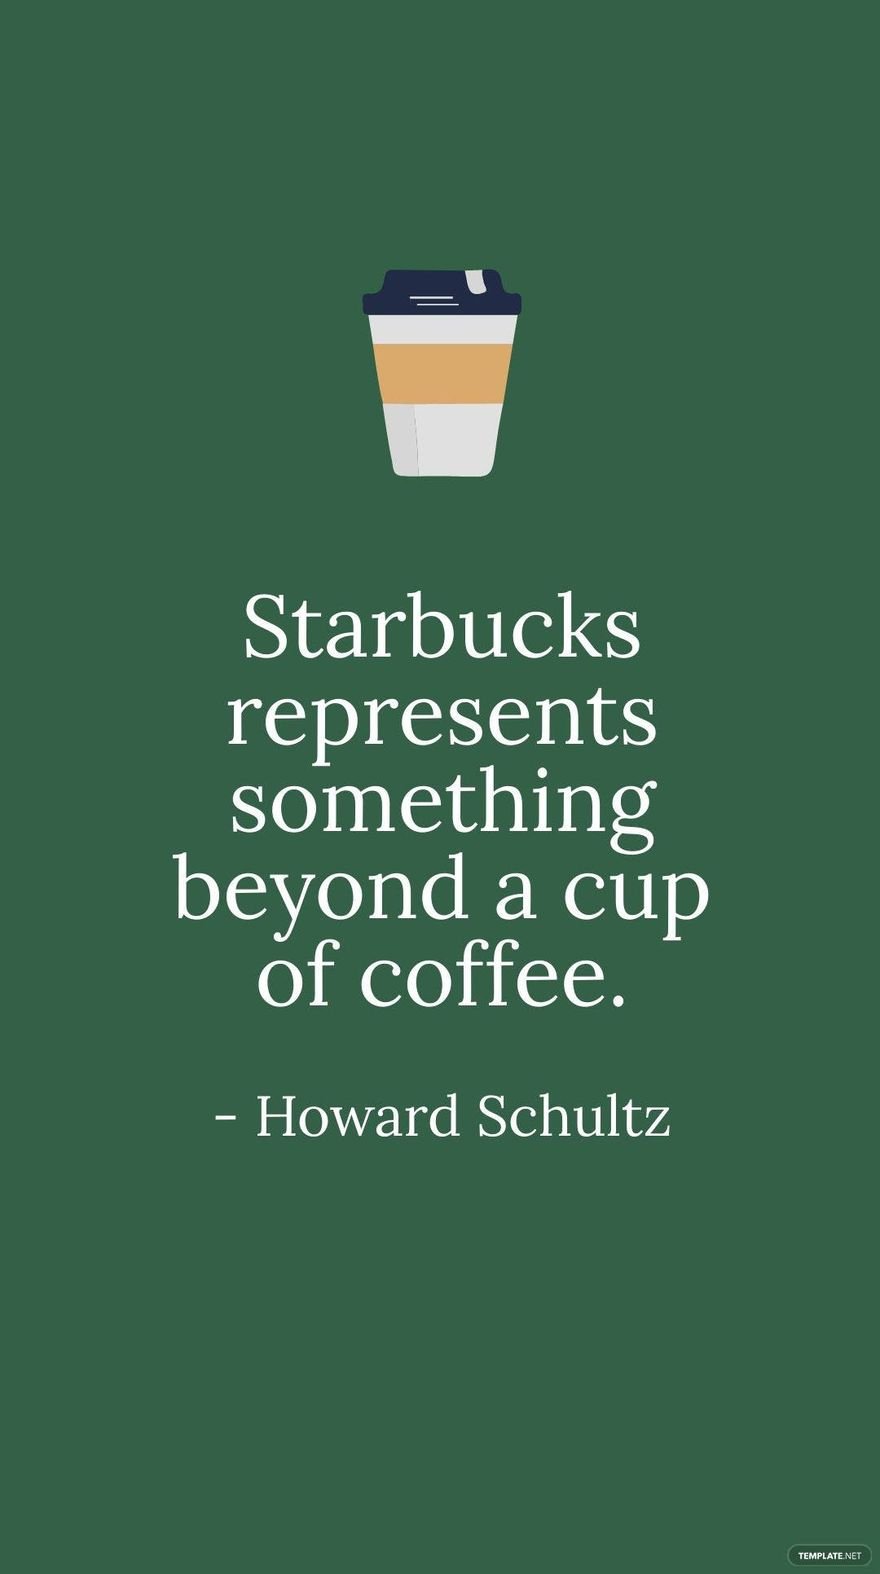 Howard Schultz - Starbucks represents something beyond a cup of coffee.